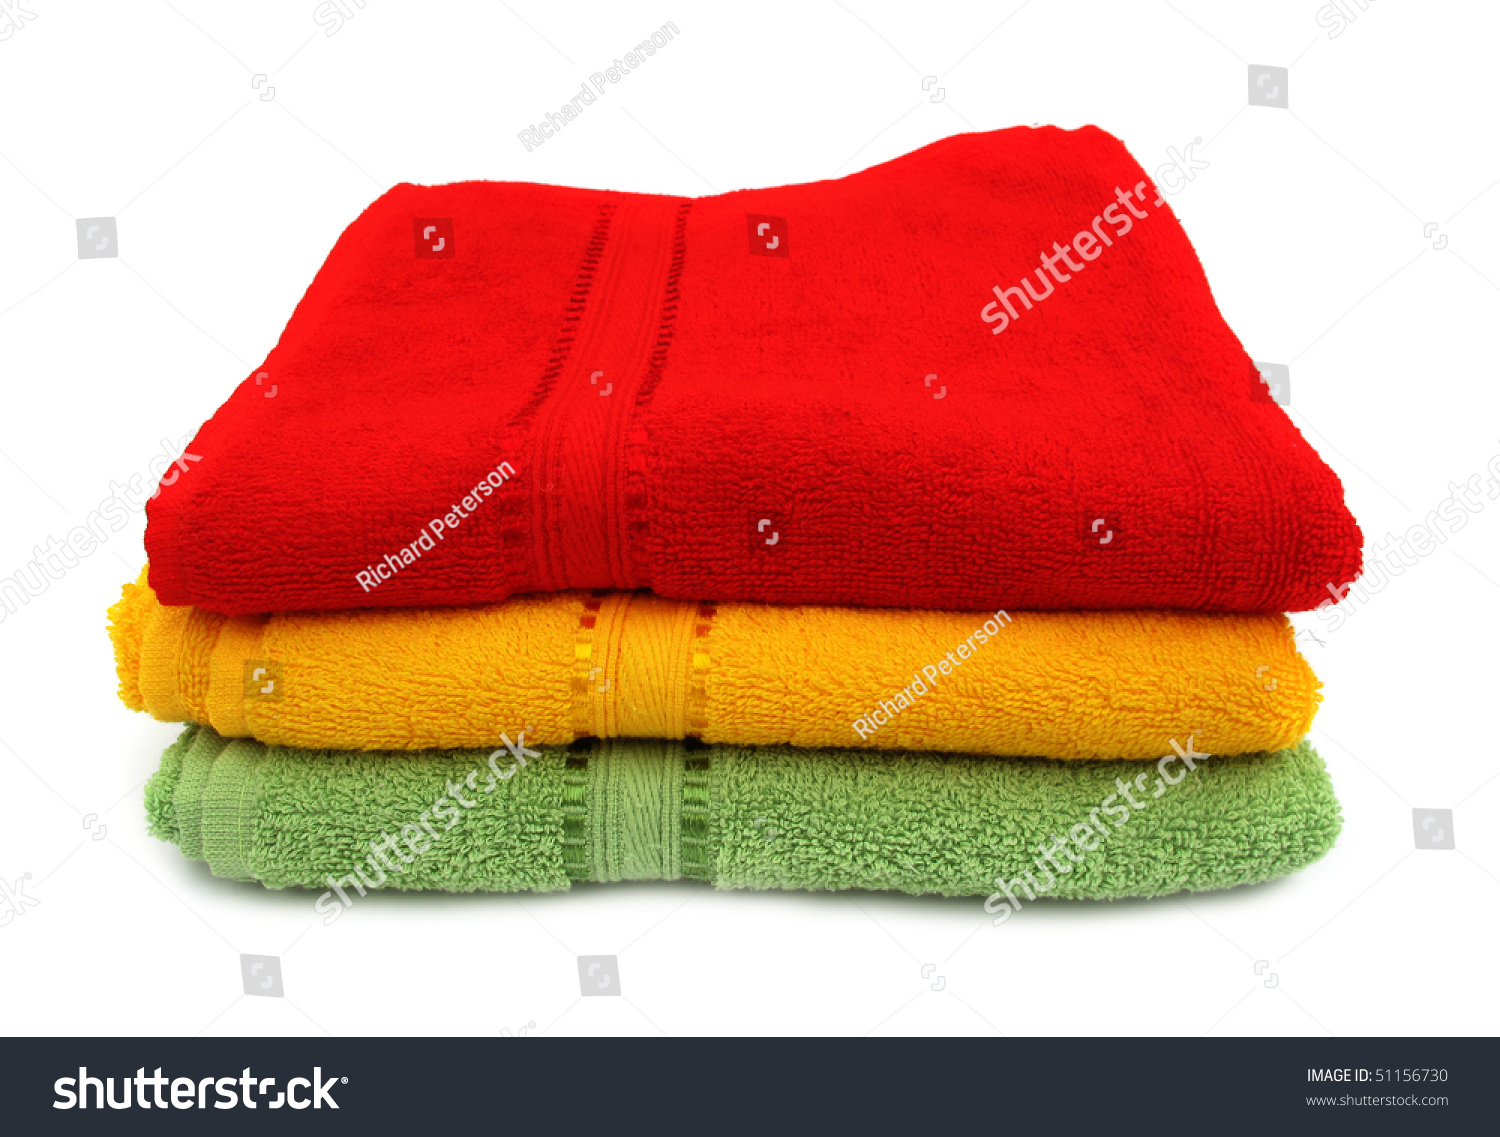 lovely towels